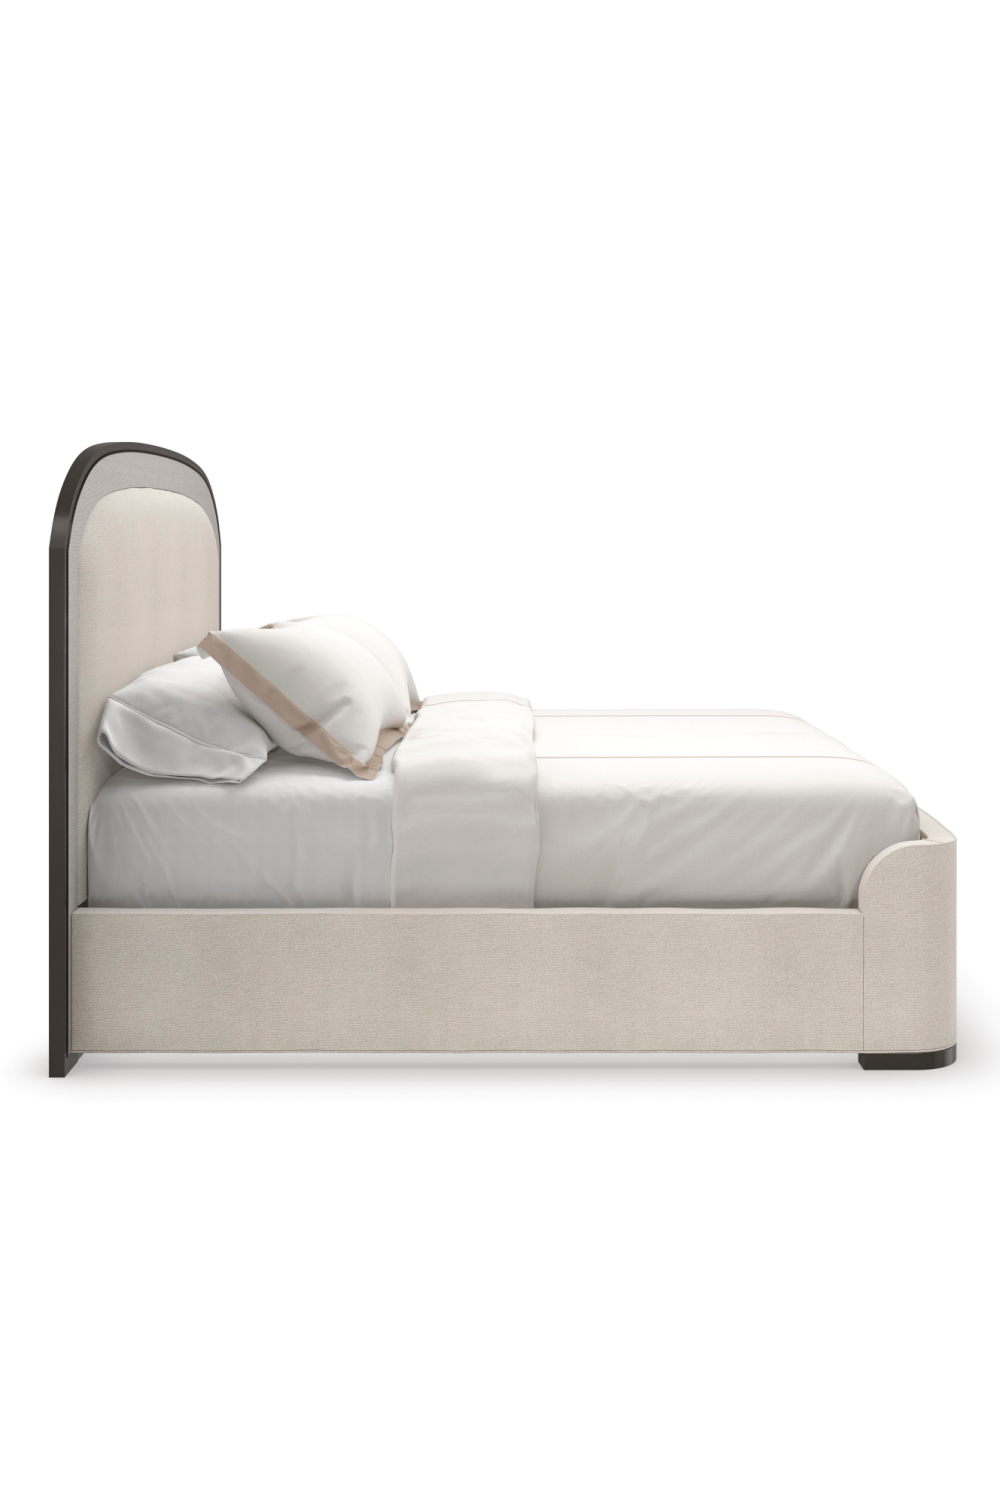 Arched Modern Bed | Caracole Wanderlust | Oroa.com